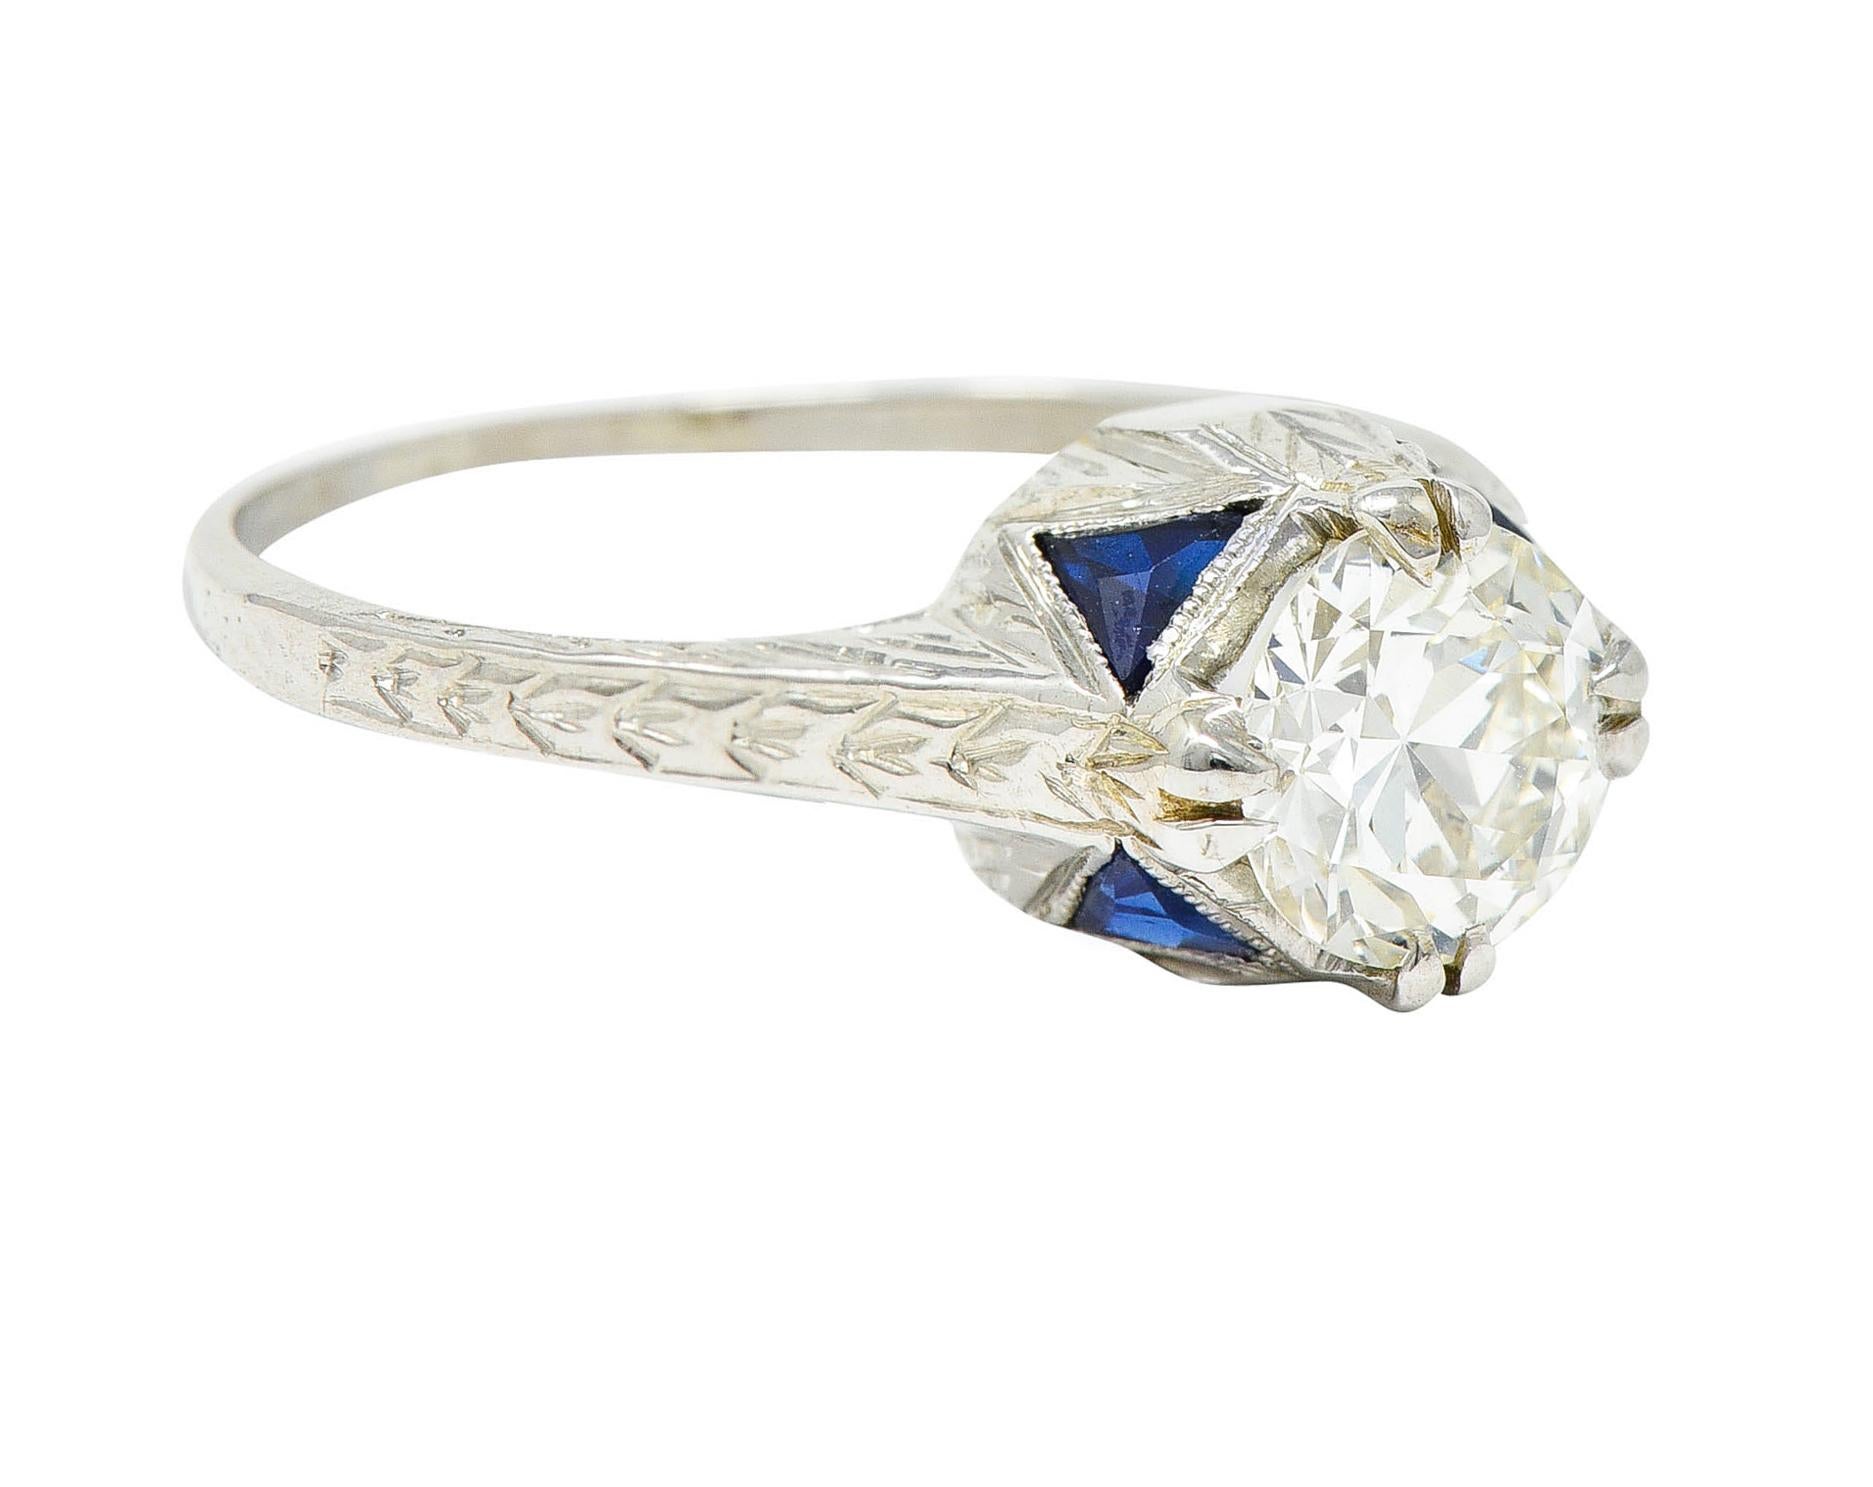 Centering a transitional cut diamond weighing approximately 0.75 carat - K color with SI1 clarity

Set by split prongs and flanked by an engraved wheat motif at shoulders

Accented by calibrè cut synthetic sapphires - medium dark blue

Stamped 18K